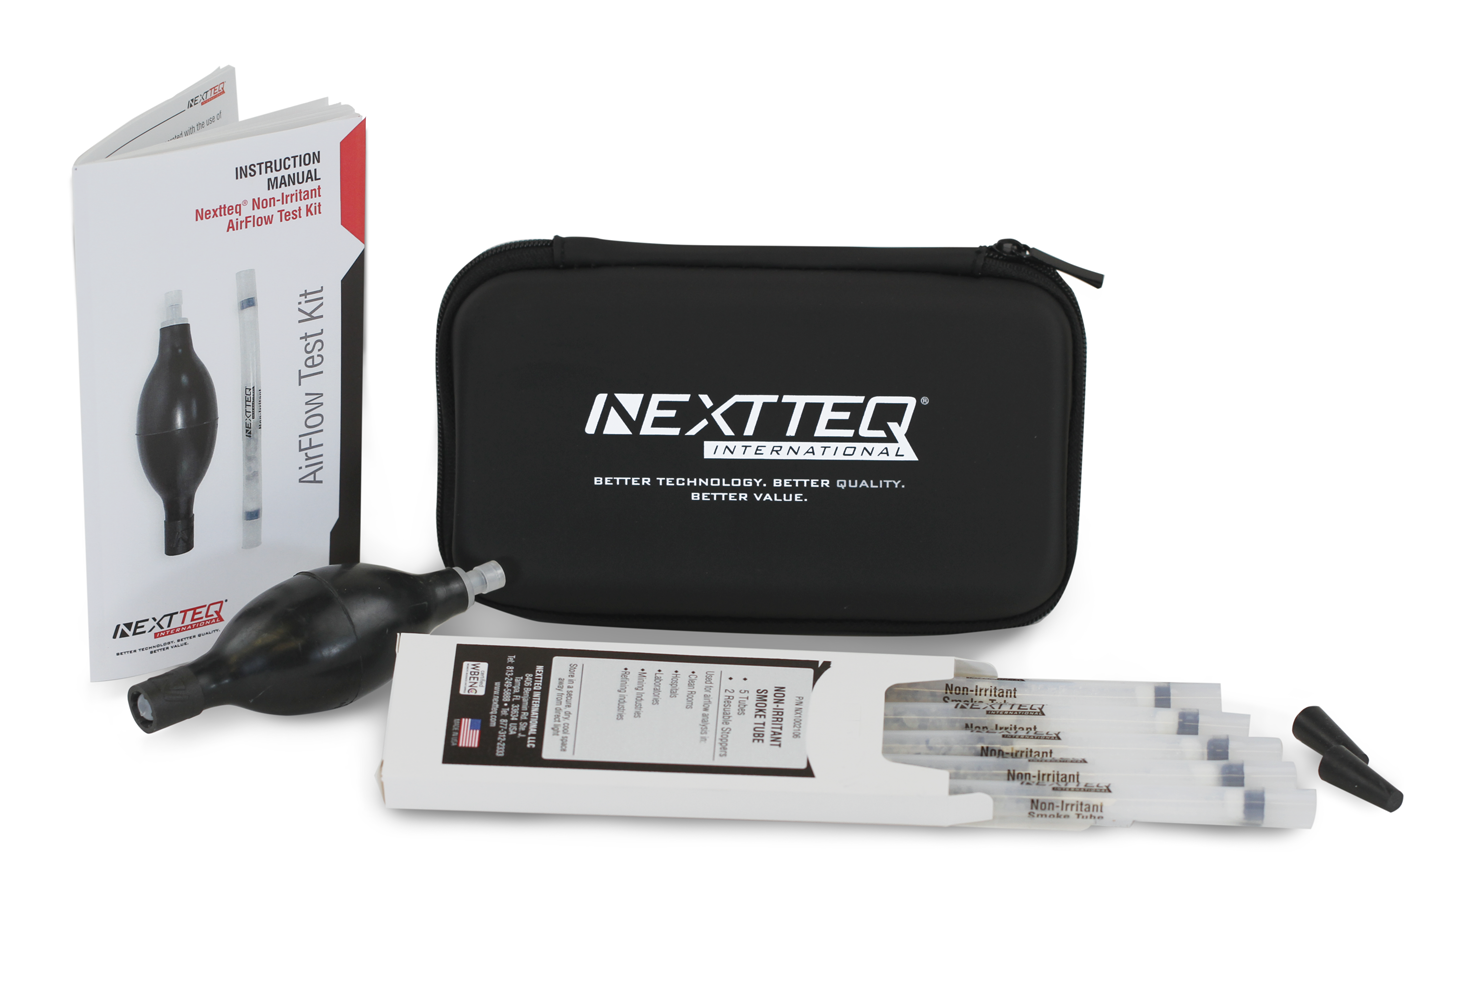 A Nextteq® Non-Irritant AirFlow Test Kit used for airflow indication.